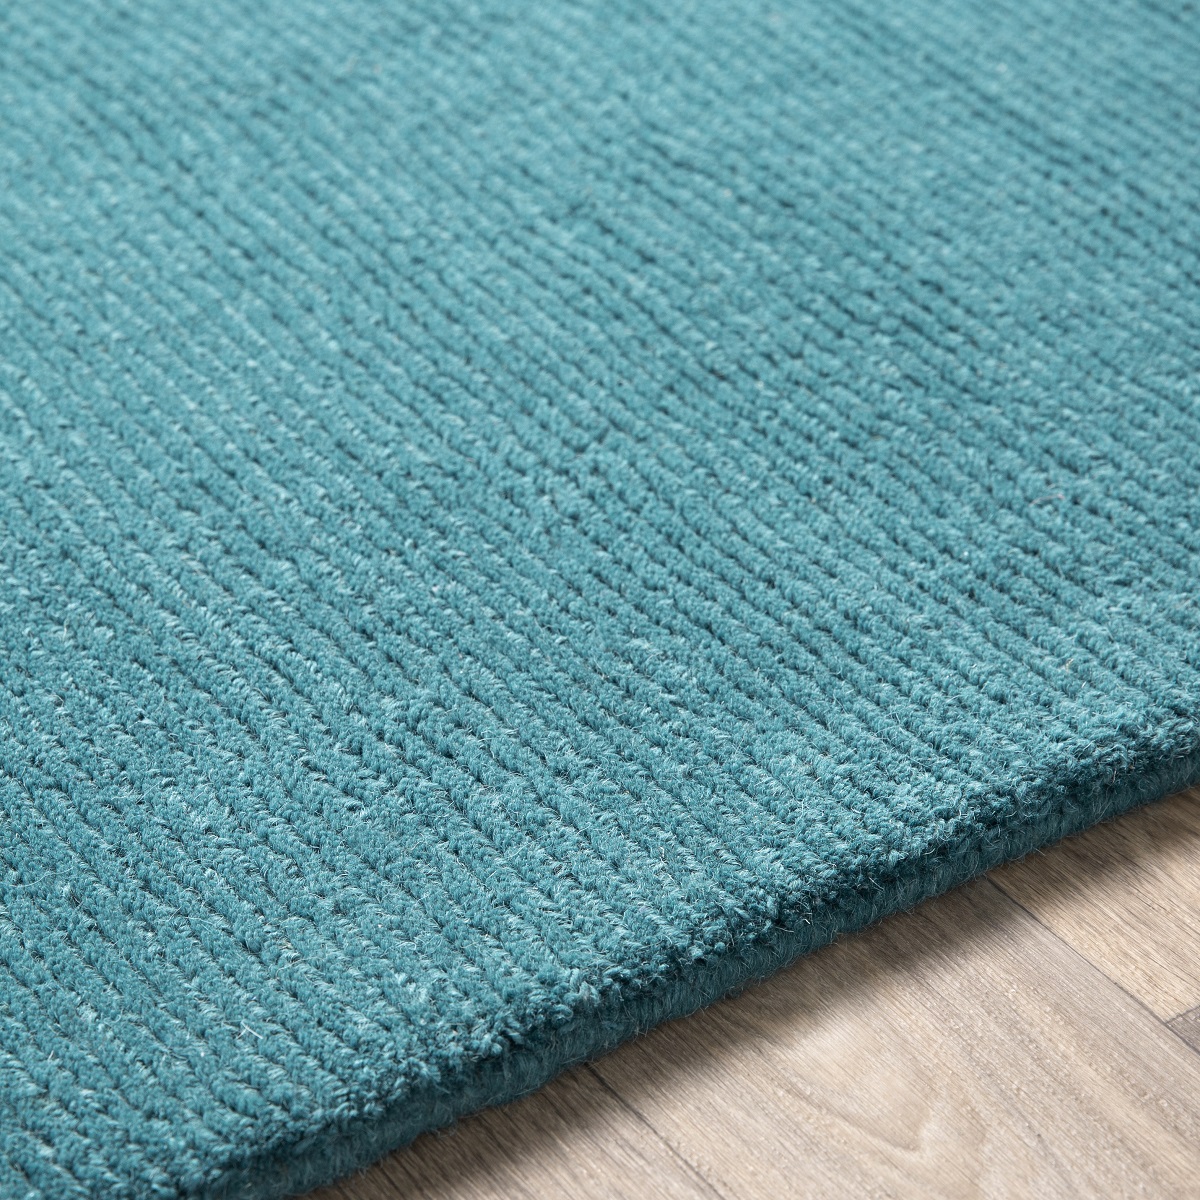 Contemporary & Modern Rugs Mystique M-5330 Aqua - Lt.Green & Other Hand Tufted Rug